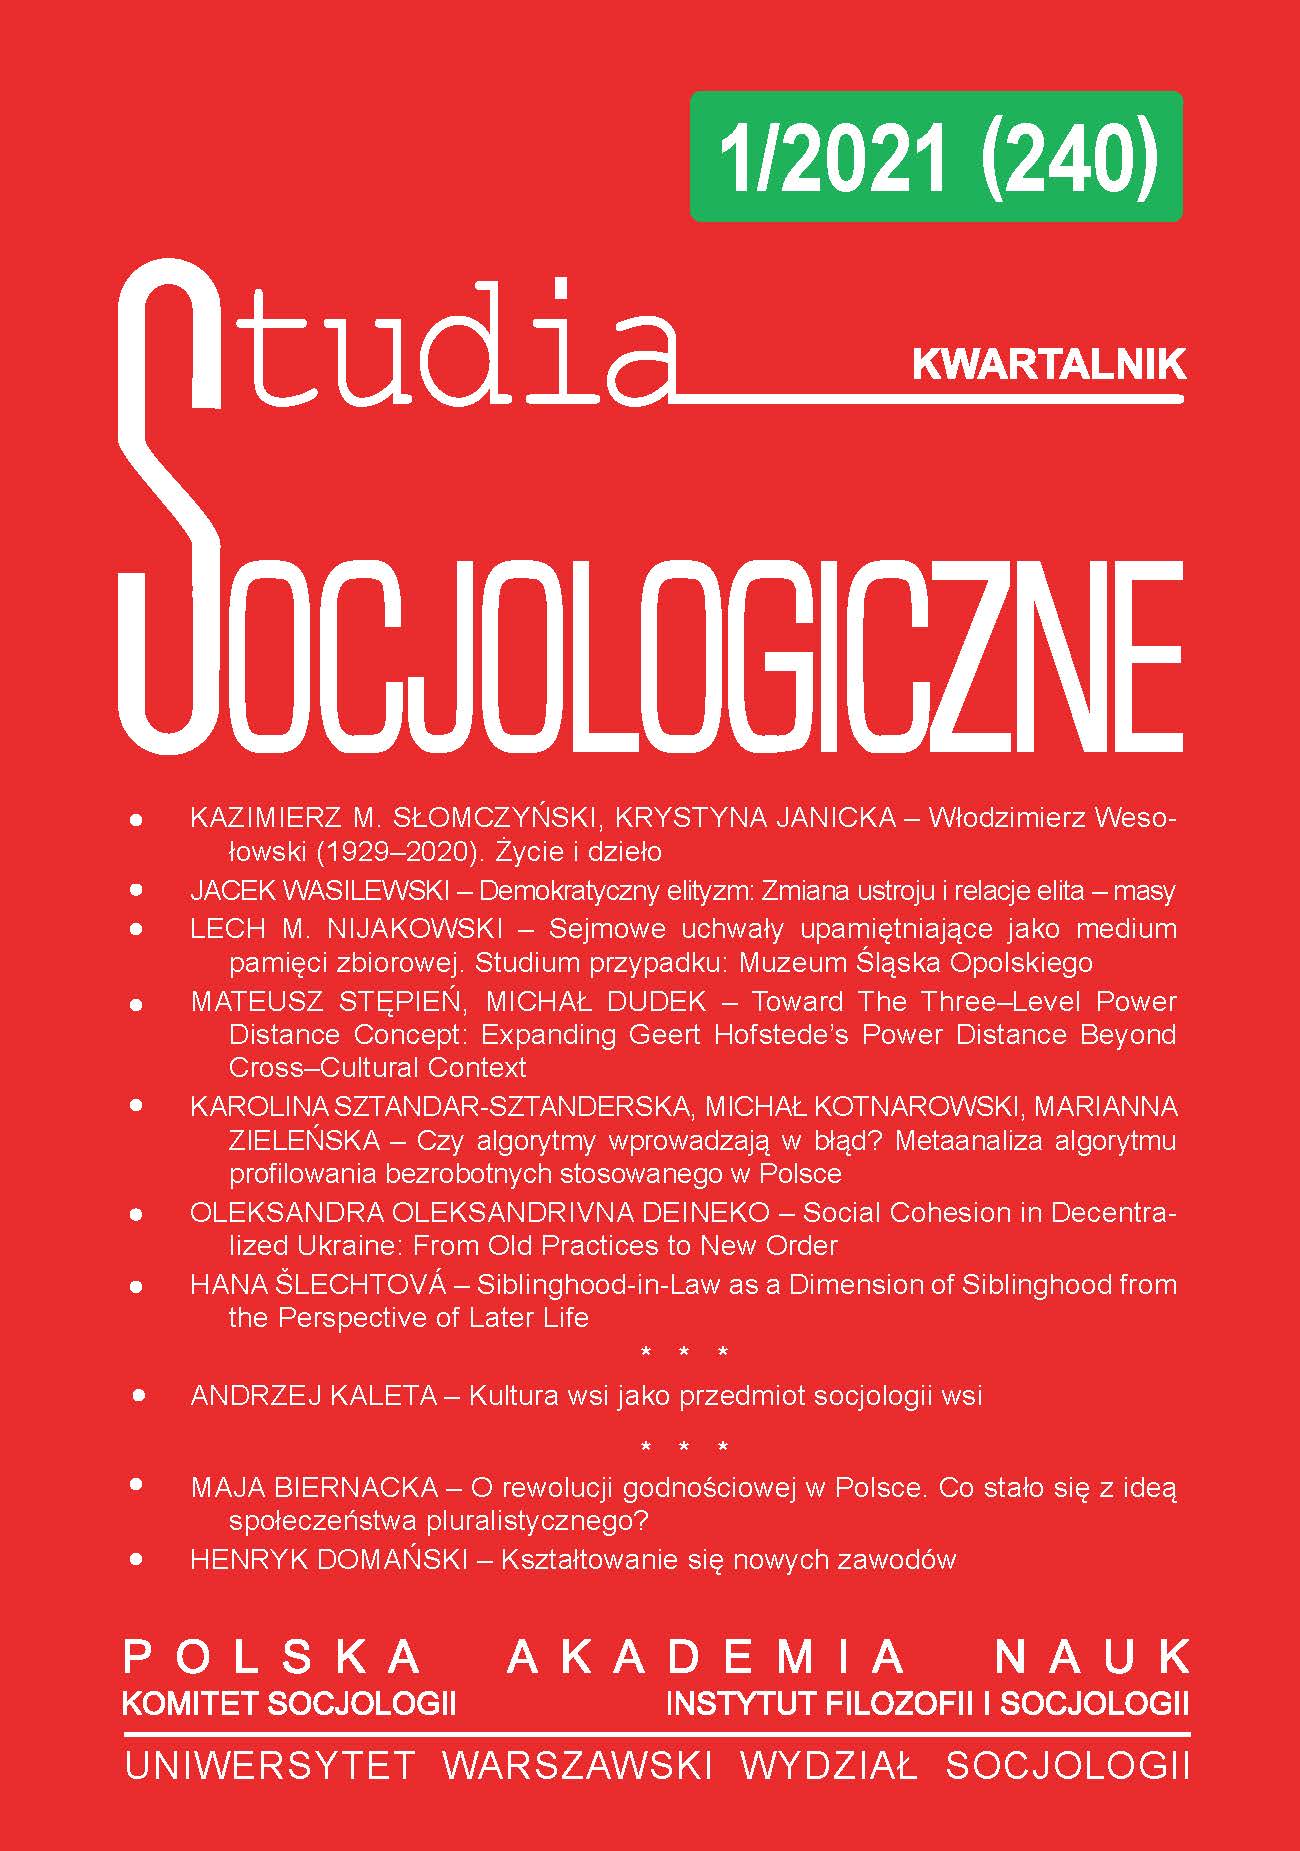 Are the algorithms misleading? Meta-analysis of the algorithm for profiling of the unemployed used in Poland Cover Image